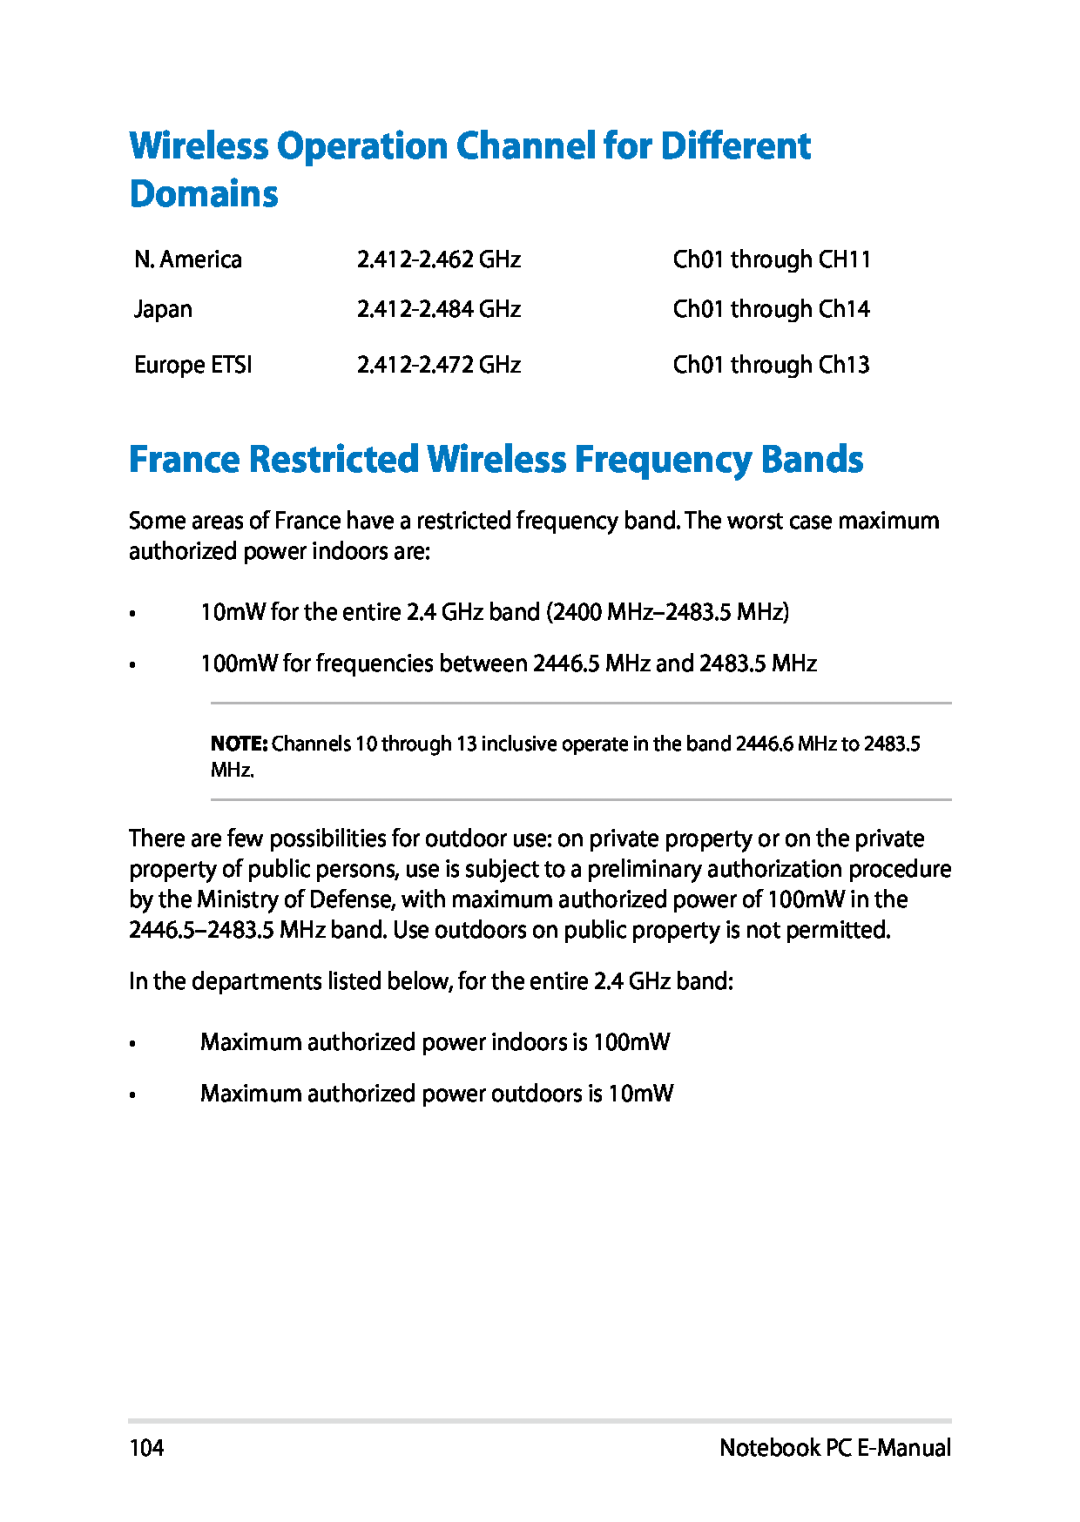 Asus E8438 manual Wireless Operation Channel for Different Domains, France Restricted Wireless Frequency Bands 